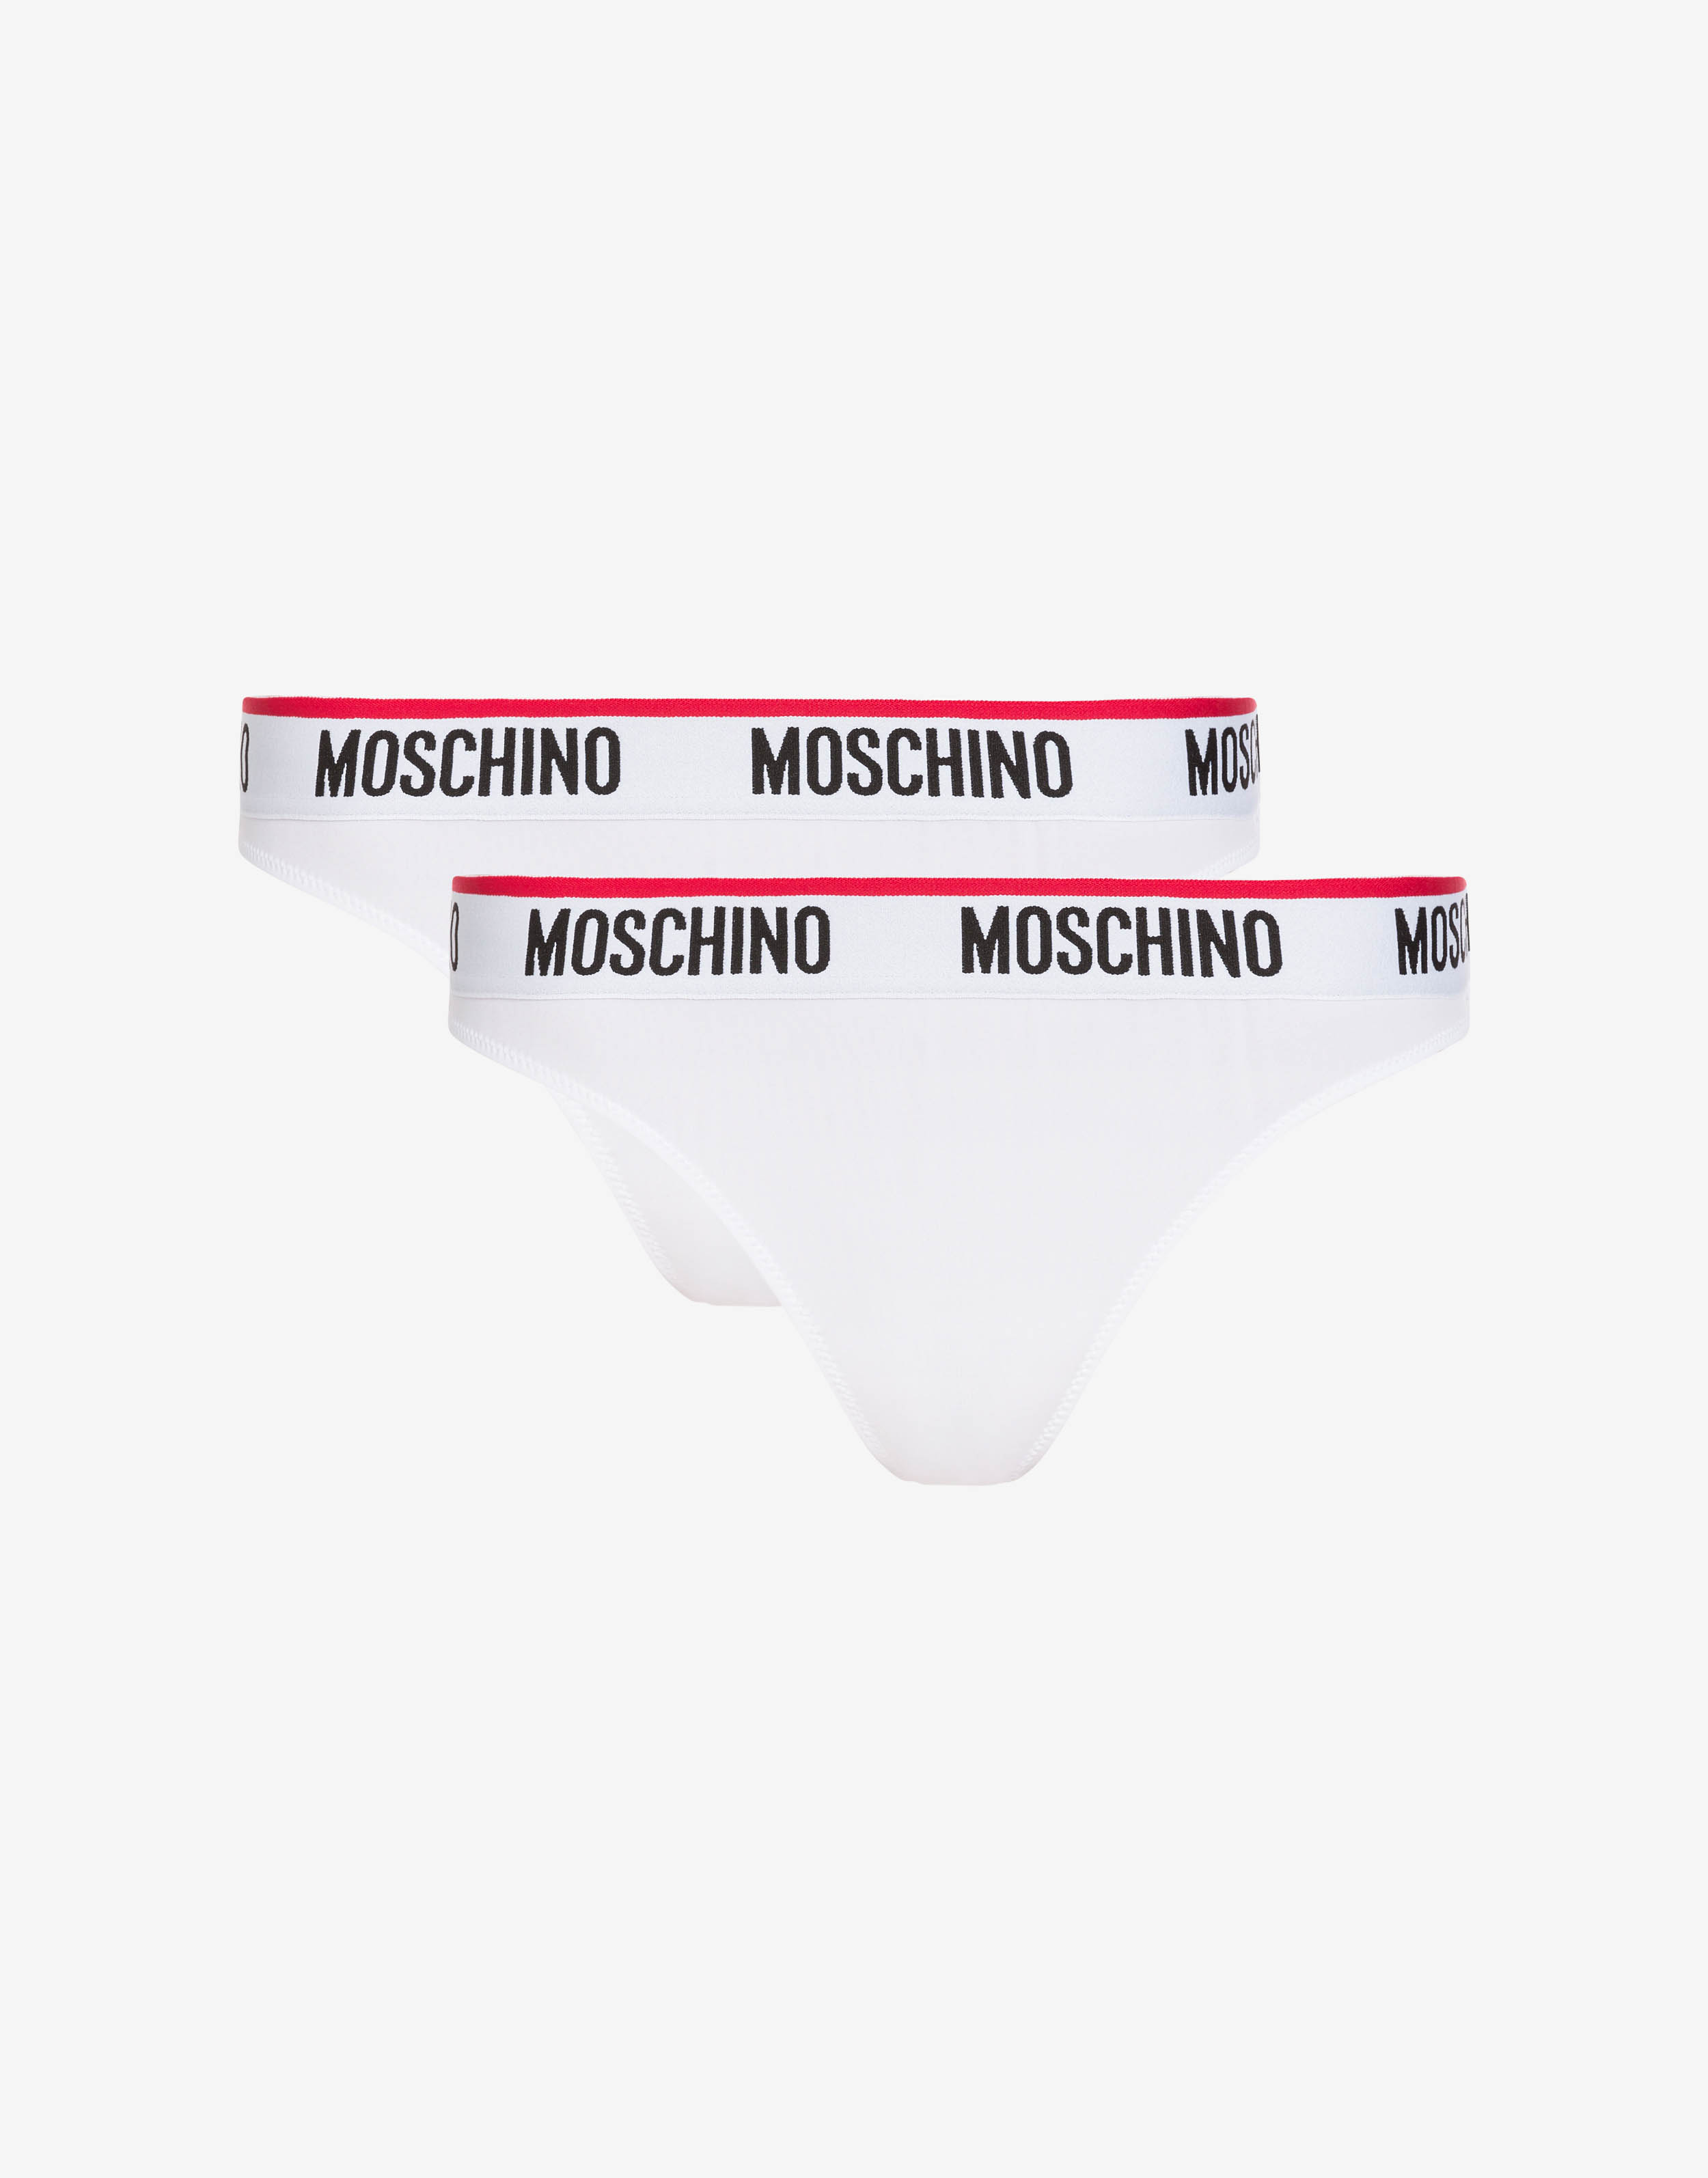 Moschino Women's Clothing - Official Store USA